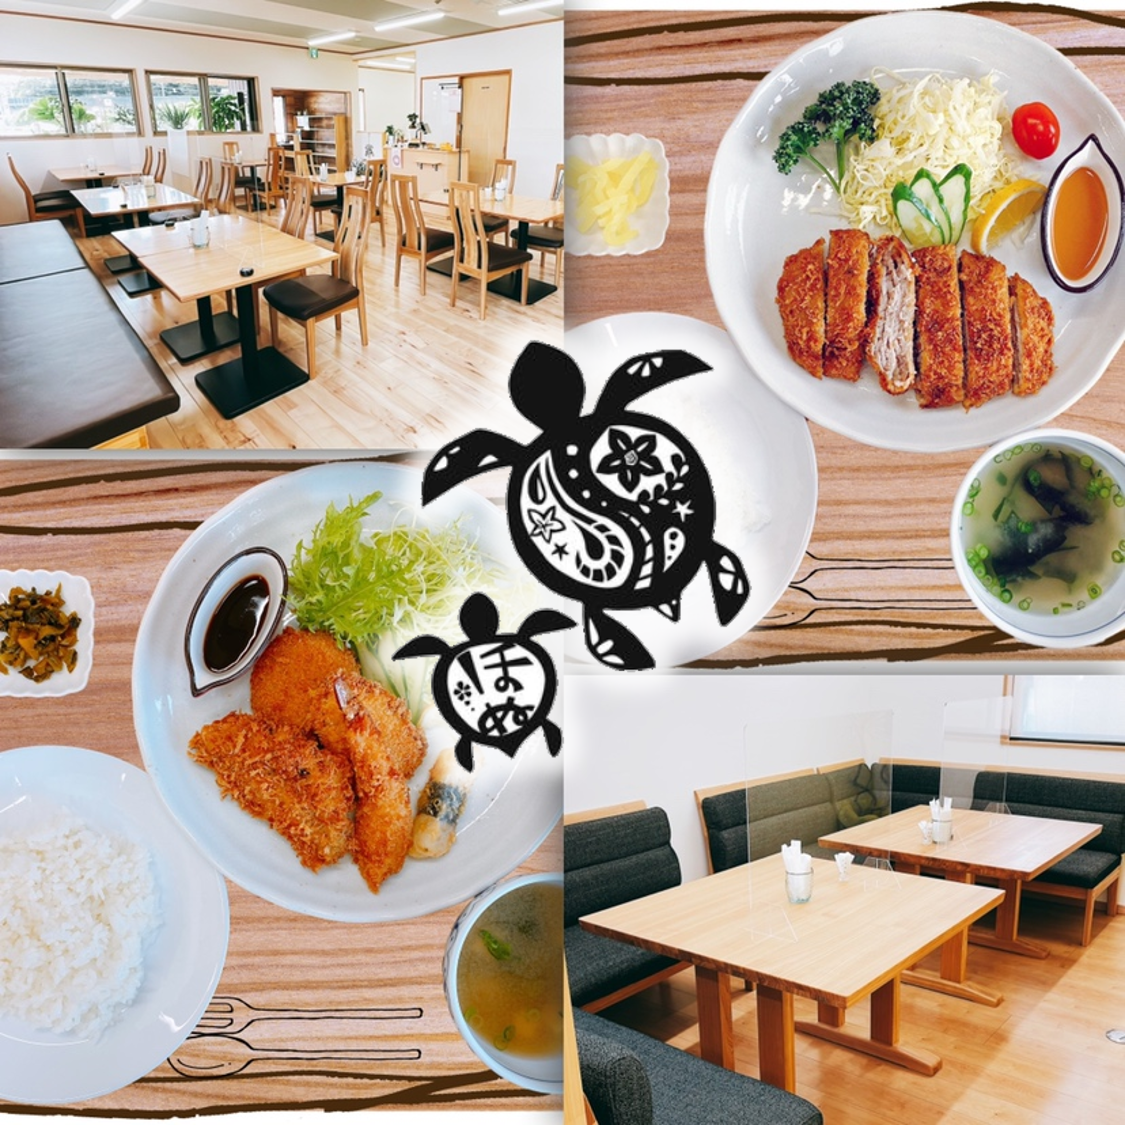 Equipped with a parking lot in Kurate-cho ◇ A cafe where you can enjoy home-cooked meals at a reasonable price ♪ We also accept reservations!